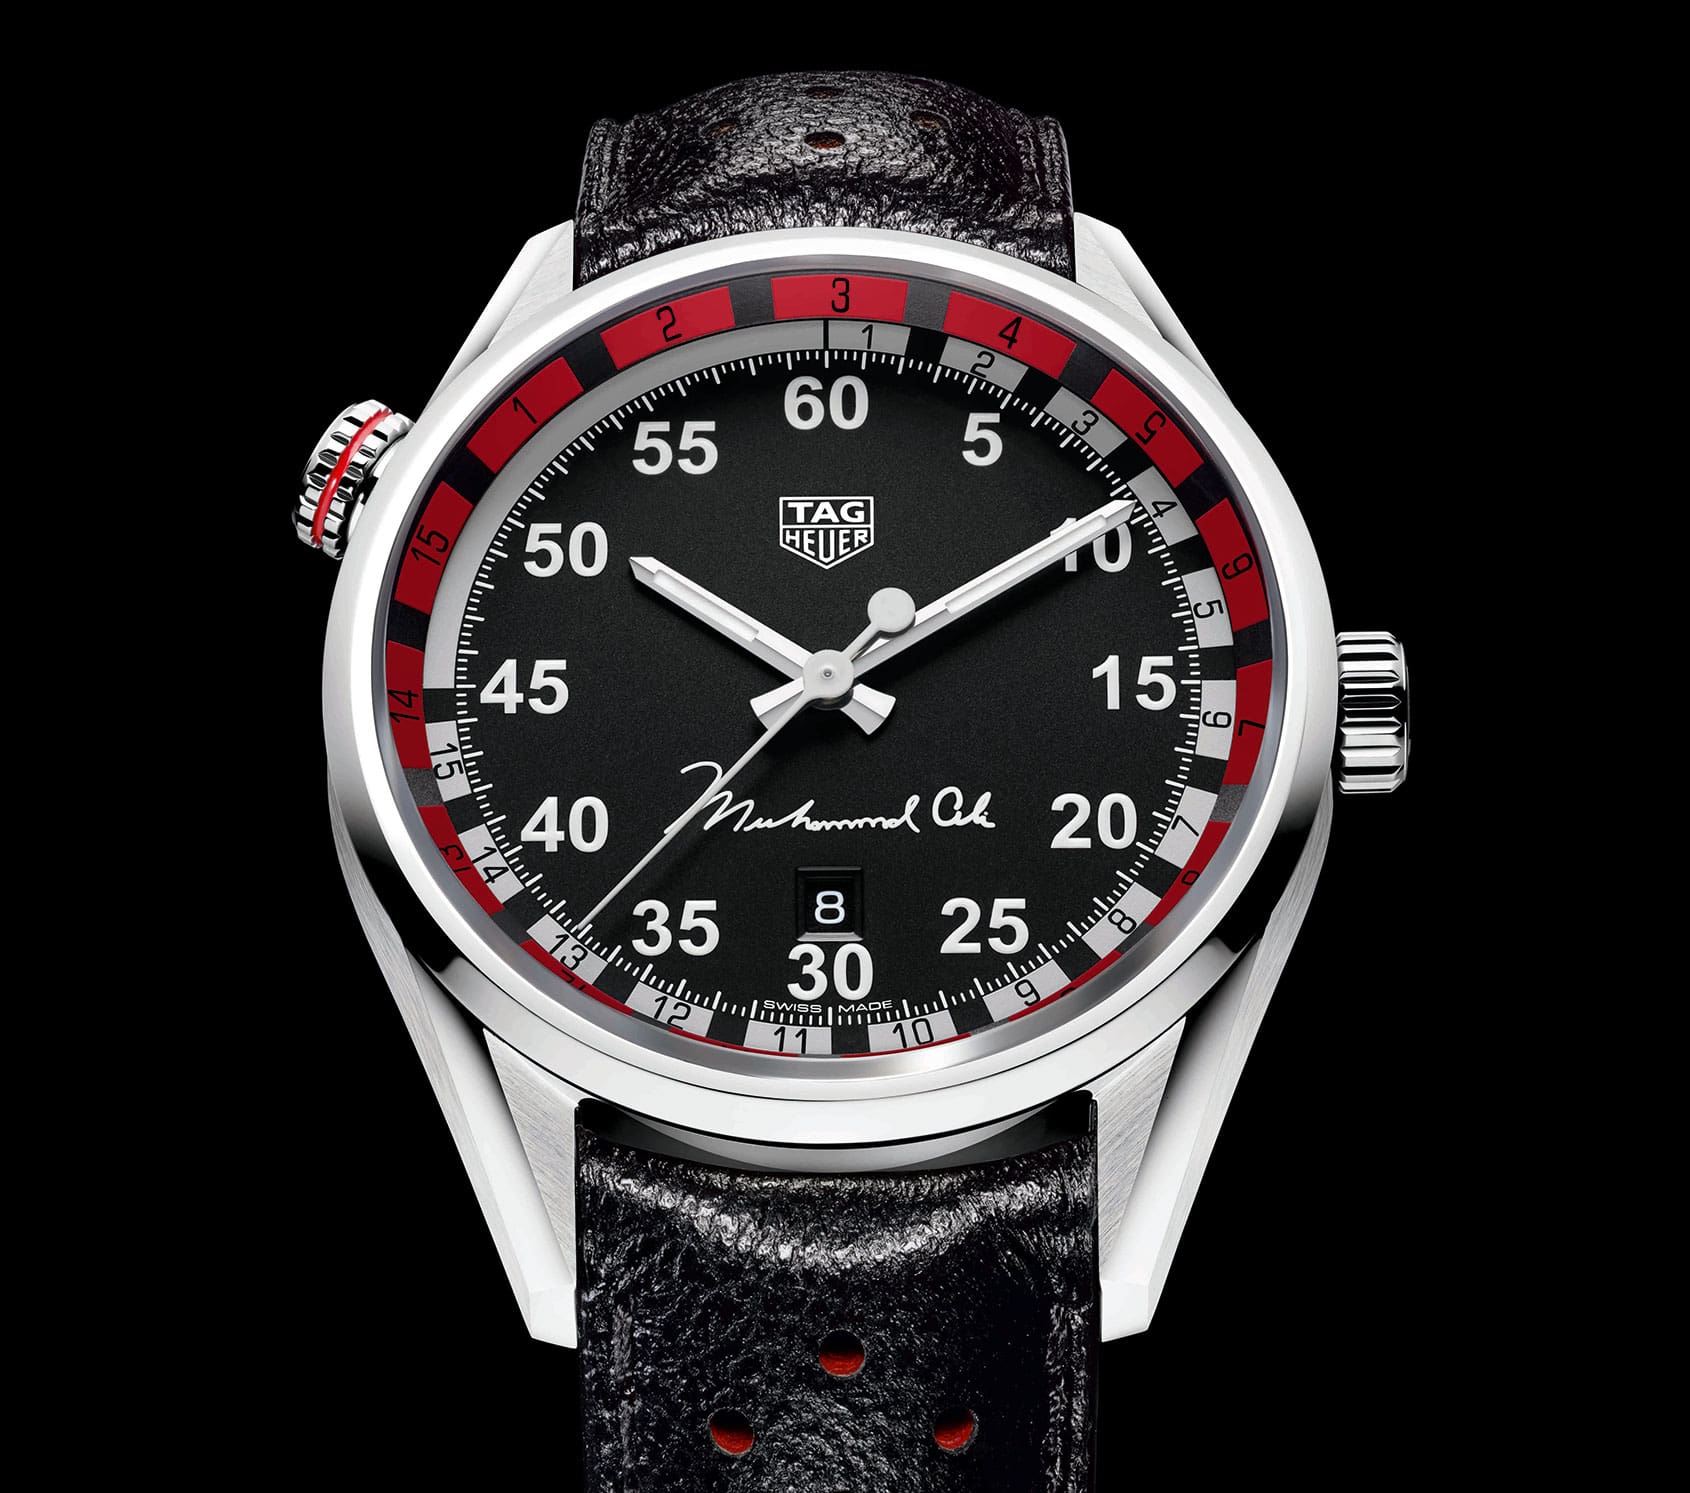 BREAKING: TAG Heuer release a tribute to Muhammad Ali – the Carrera Calibre 5 ‘Ring Master’